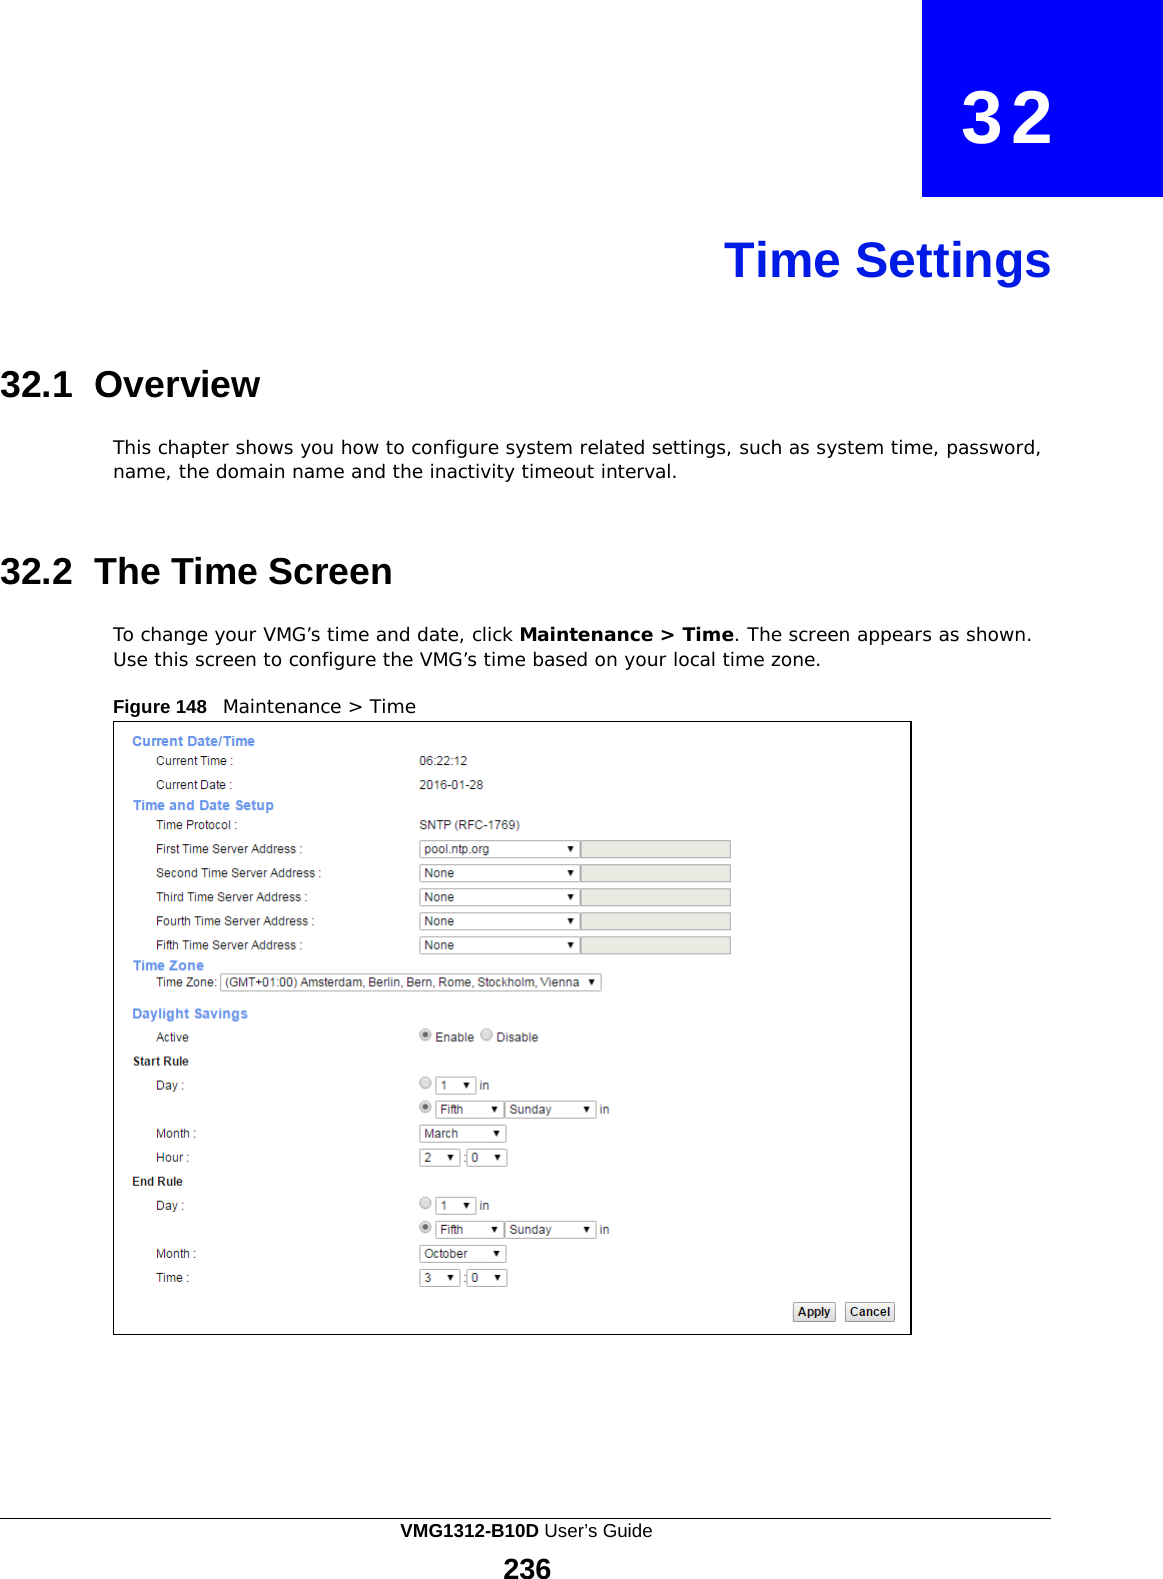    32     Time Settings     32.1 Overview  This chapter shows you how to configure system related settings, such as system time, password, name, the domain name and the inactivity timeout interval.    32.2  The Time Screen  To change your VMG’s time and date, click Maintenance &gt; Time. The screen appears as shown. Use this screen to configure the VMG’s time based on your local time zone.  Figure 148   Maintenance &gt; Time VMG1312-B10D User’s Guide 236  